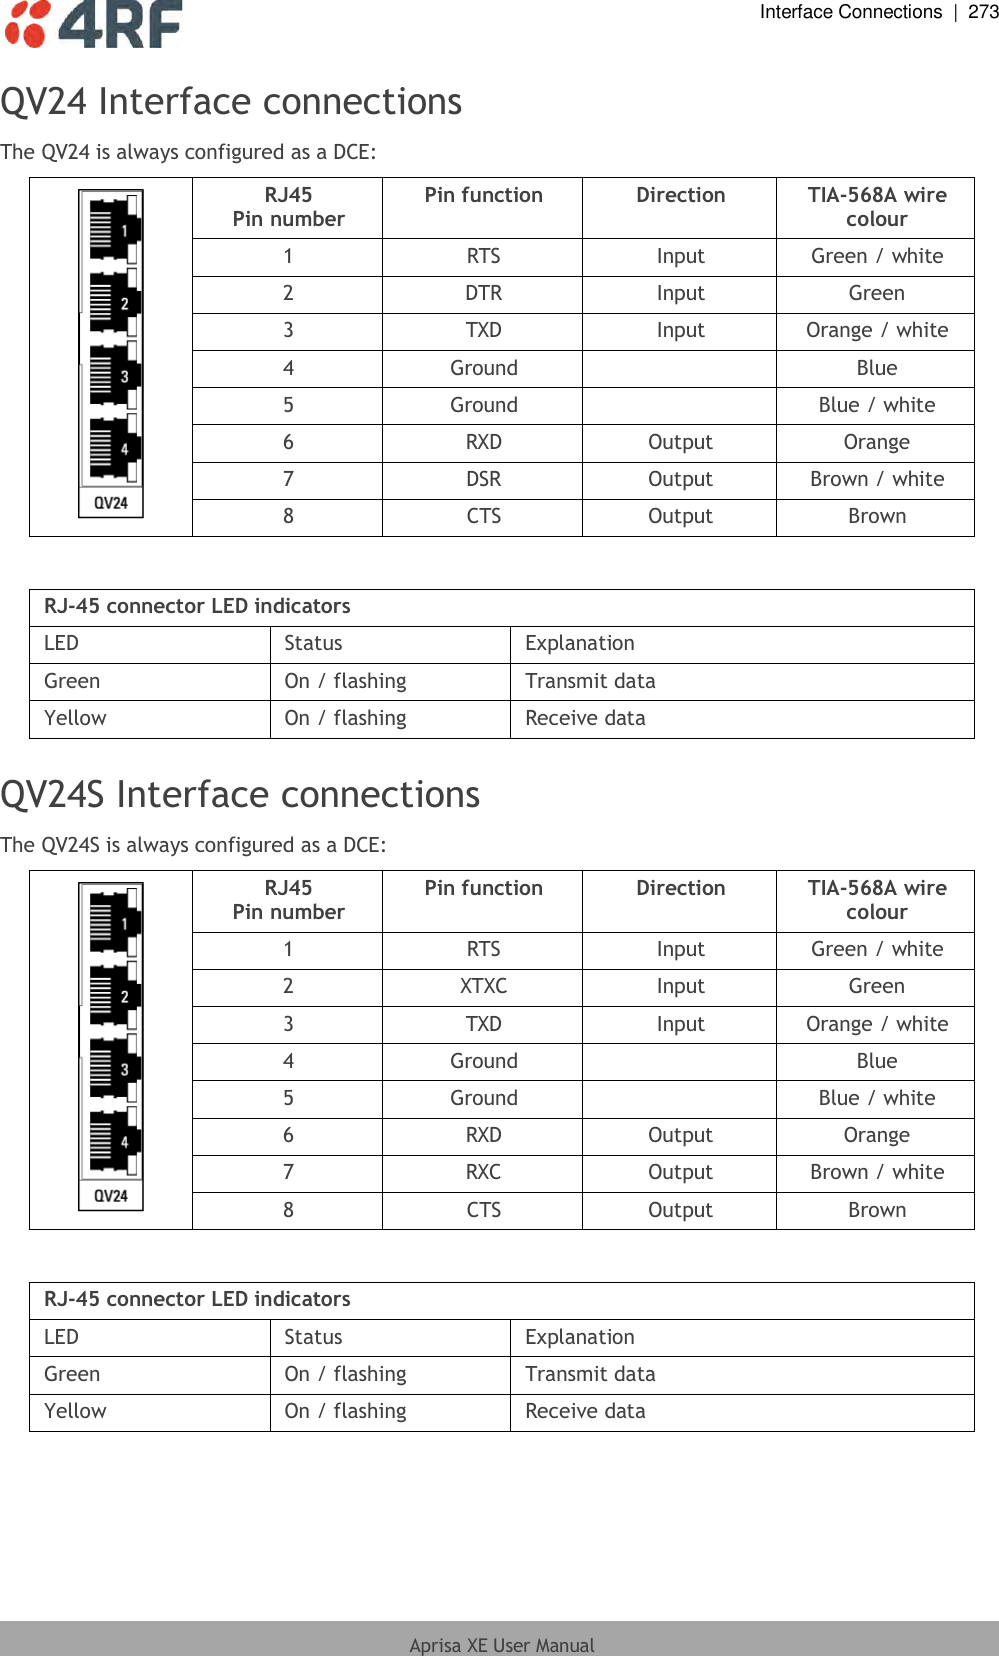  Interface Connections  |  273  Aprisa XE User Manual  QV24 Interface connections The QV24 is always configured as a DCE:  RJ45 Pin number Pin function Direction TIA-568A wire colour 1 RTS Input Green / white 2 DTR Input Green 3 TXD Input Orange / white 4 Ground  Blue 5 Ground  Blue / white 6 RXD Output Orange 7 DSR Output Brown / white 8 CTS Output Brown  RJ-45 connector LED indicators LED Status Explanation Green On / flashing Transmit data Yellow On / flashing Receive data  QV24S Interface connections The QV24S is always configured as a DCE:  RJ45 Pin number Pin function Direction TIA-568A wire colour 1 RTS Input Green / white 2 XTXC Input Green 3 TXD Input Orange / white 4 Ground  Blue 5 Ground  Blue / white 6 RXD Output Orange 7 RXC Output Brown / white 8 CTS Output Brown  RJ-45 connector LED indicators LED Status Explanation Green On / flashing Transmit data Yellow On / flashing Receive data   